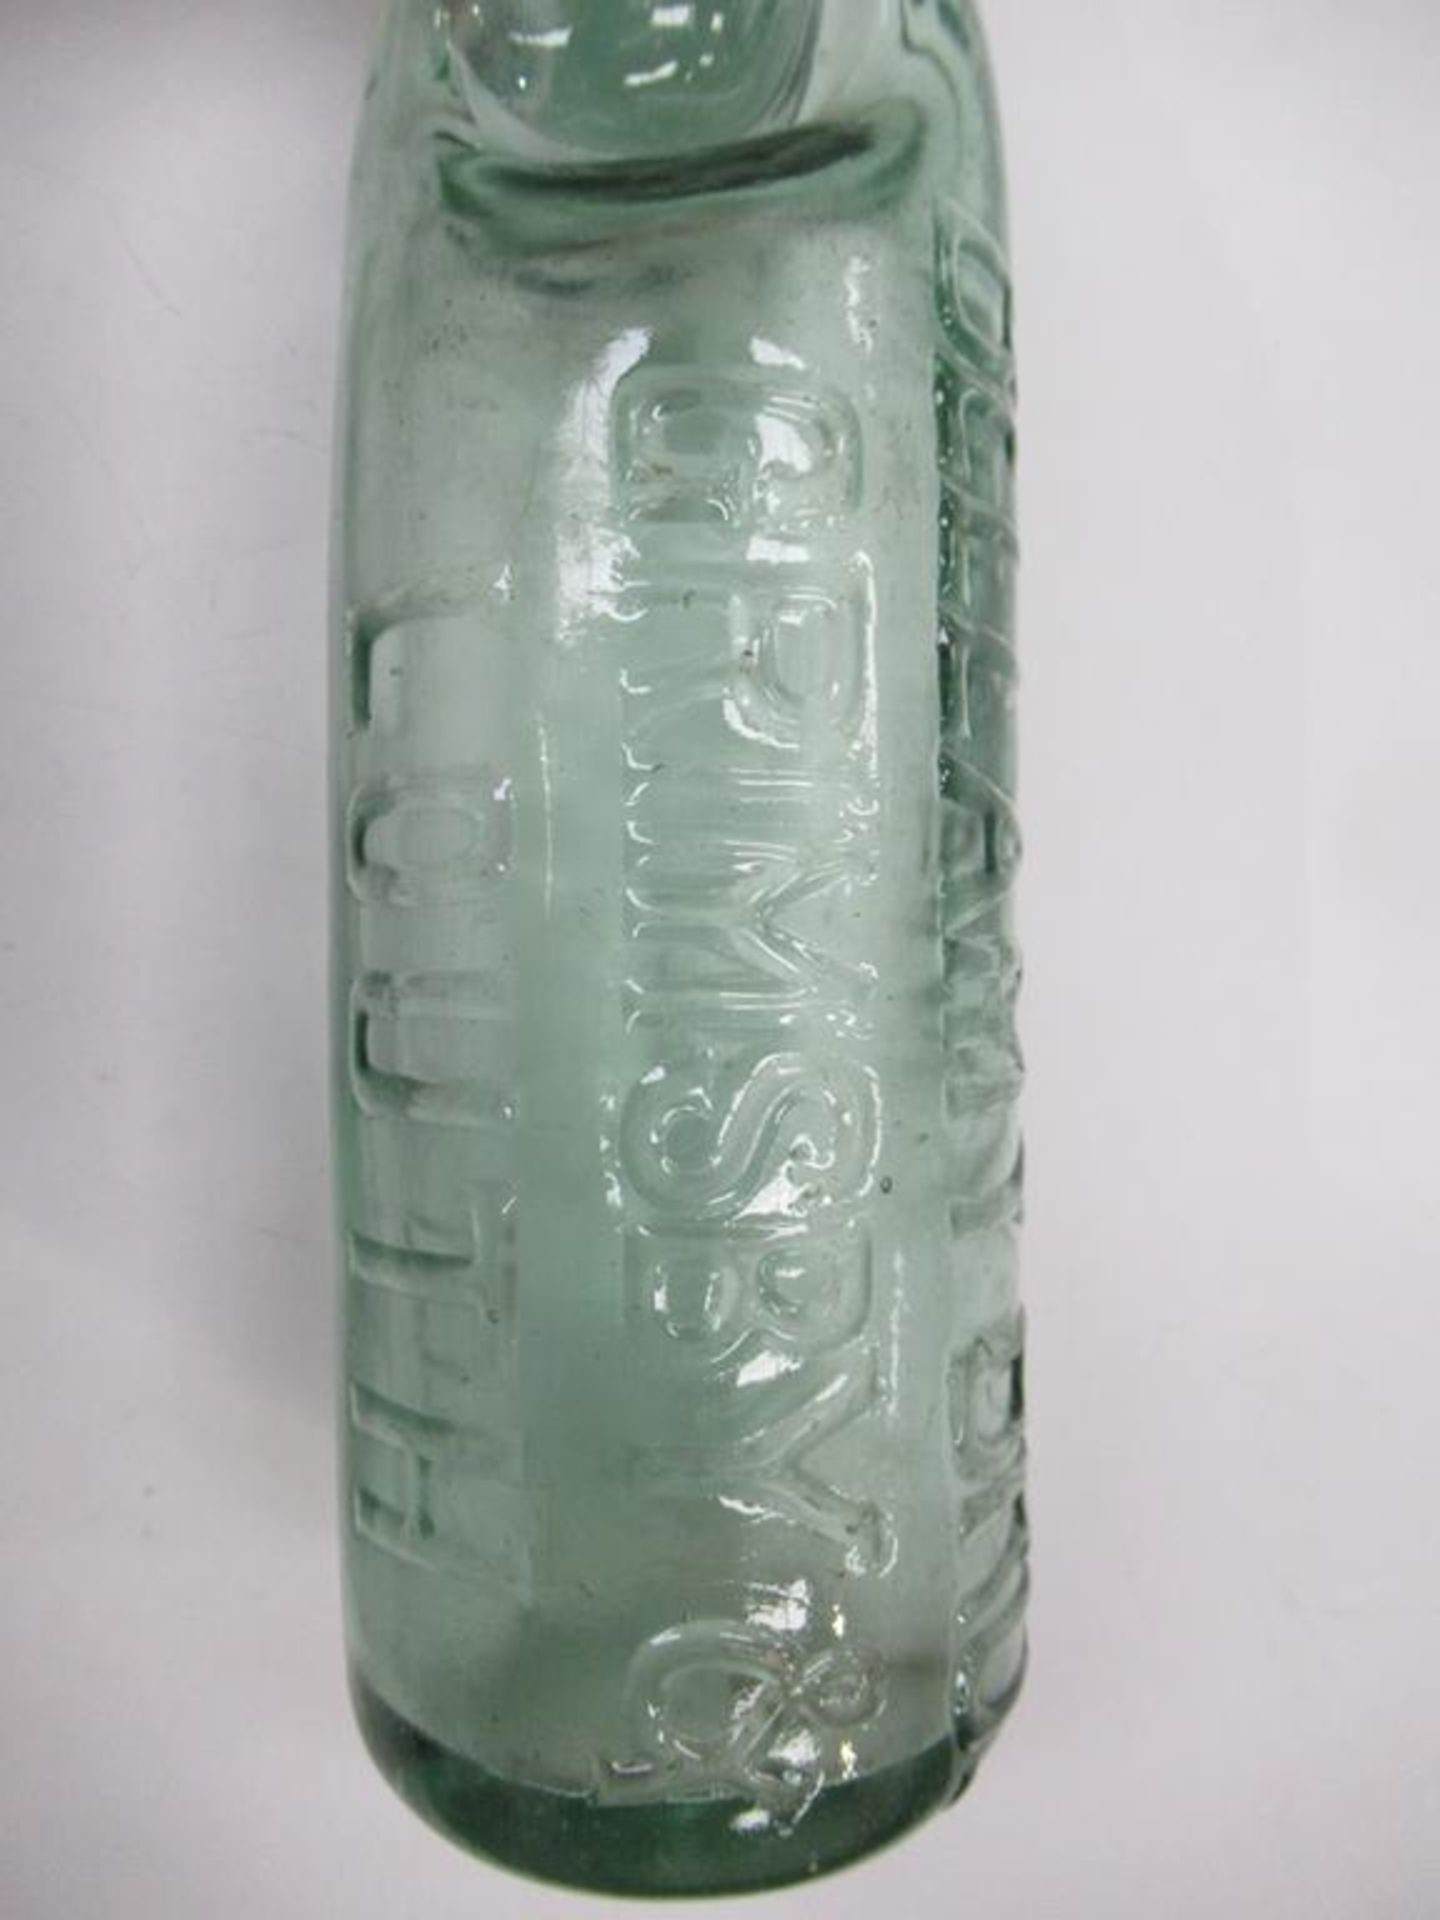 7x Grimsby (3x Grimsby & Louth) Bellamy Bro's Codd bottles - Image 11 of 23